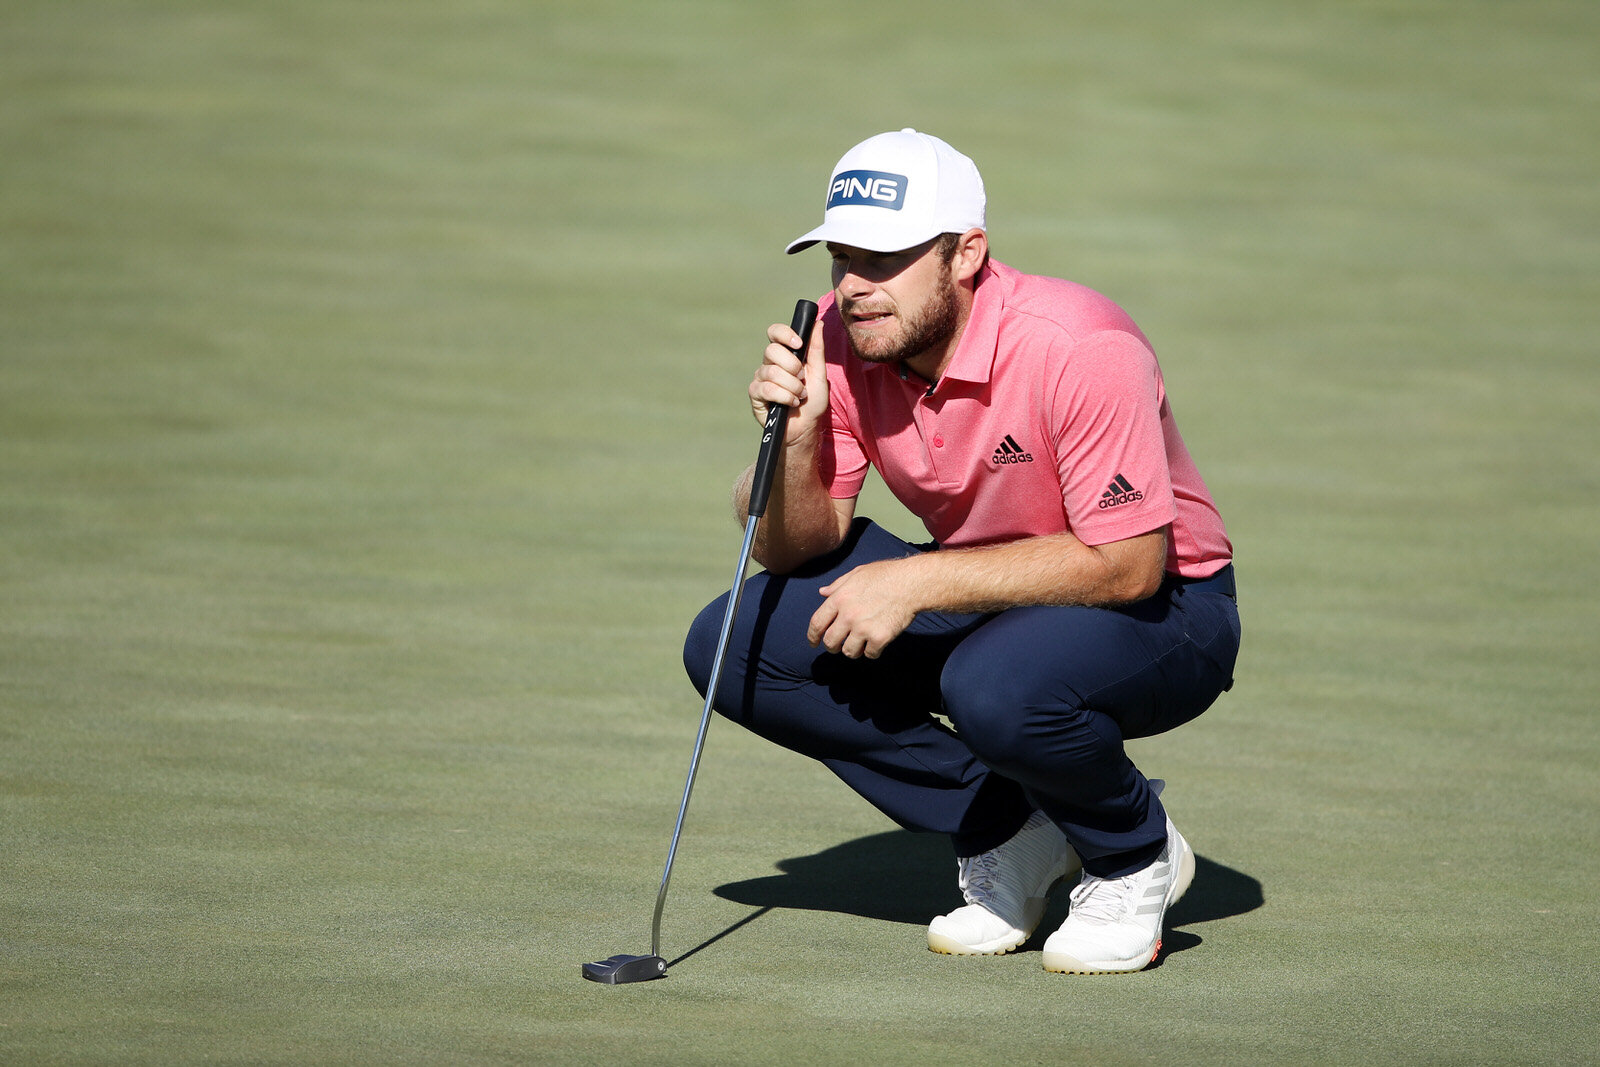  LAS VEGAS, NEVADA - OCTOBER 18: Tyrrell Hatton of England lines up a putt on the 12th green during the final round of The CJ Cup @ Shadow Creek on October 18, 2020 in Las Vegas, Nevada. (Photo by Christian Petersen/Getty Images) 